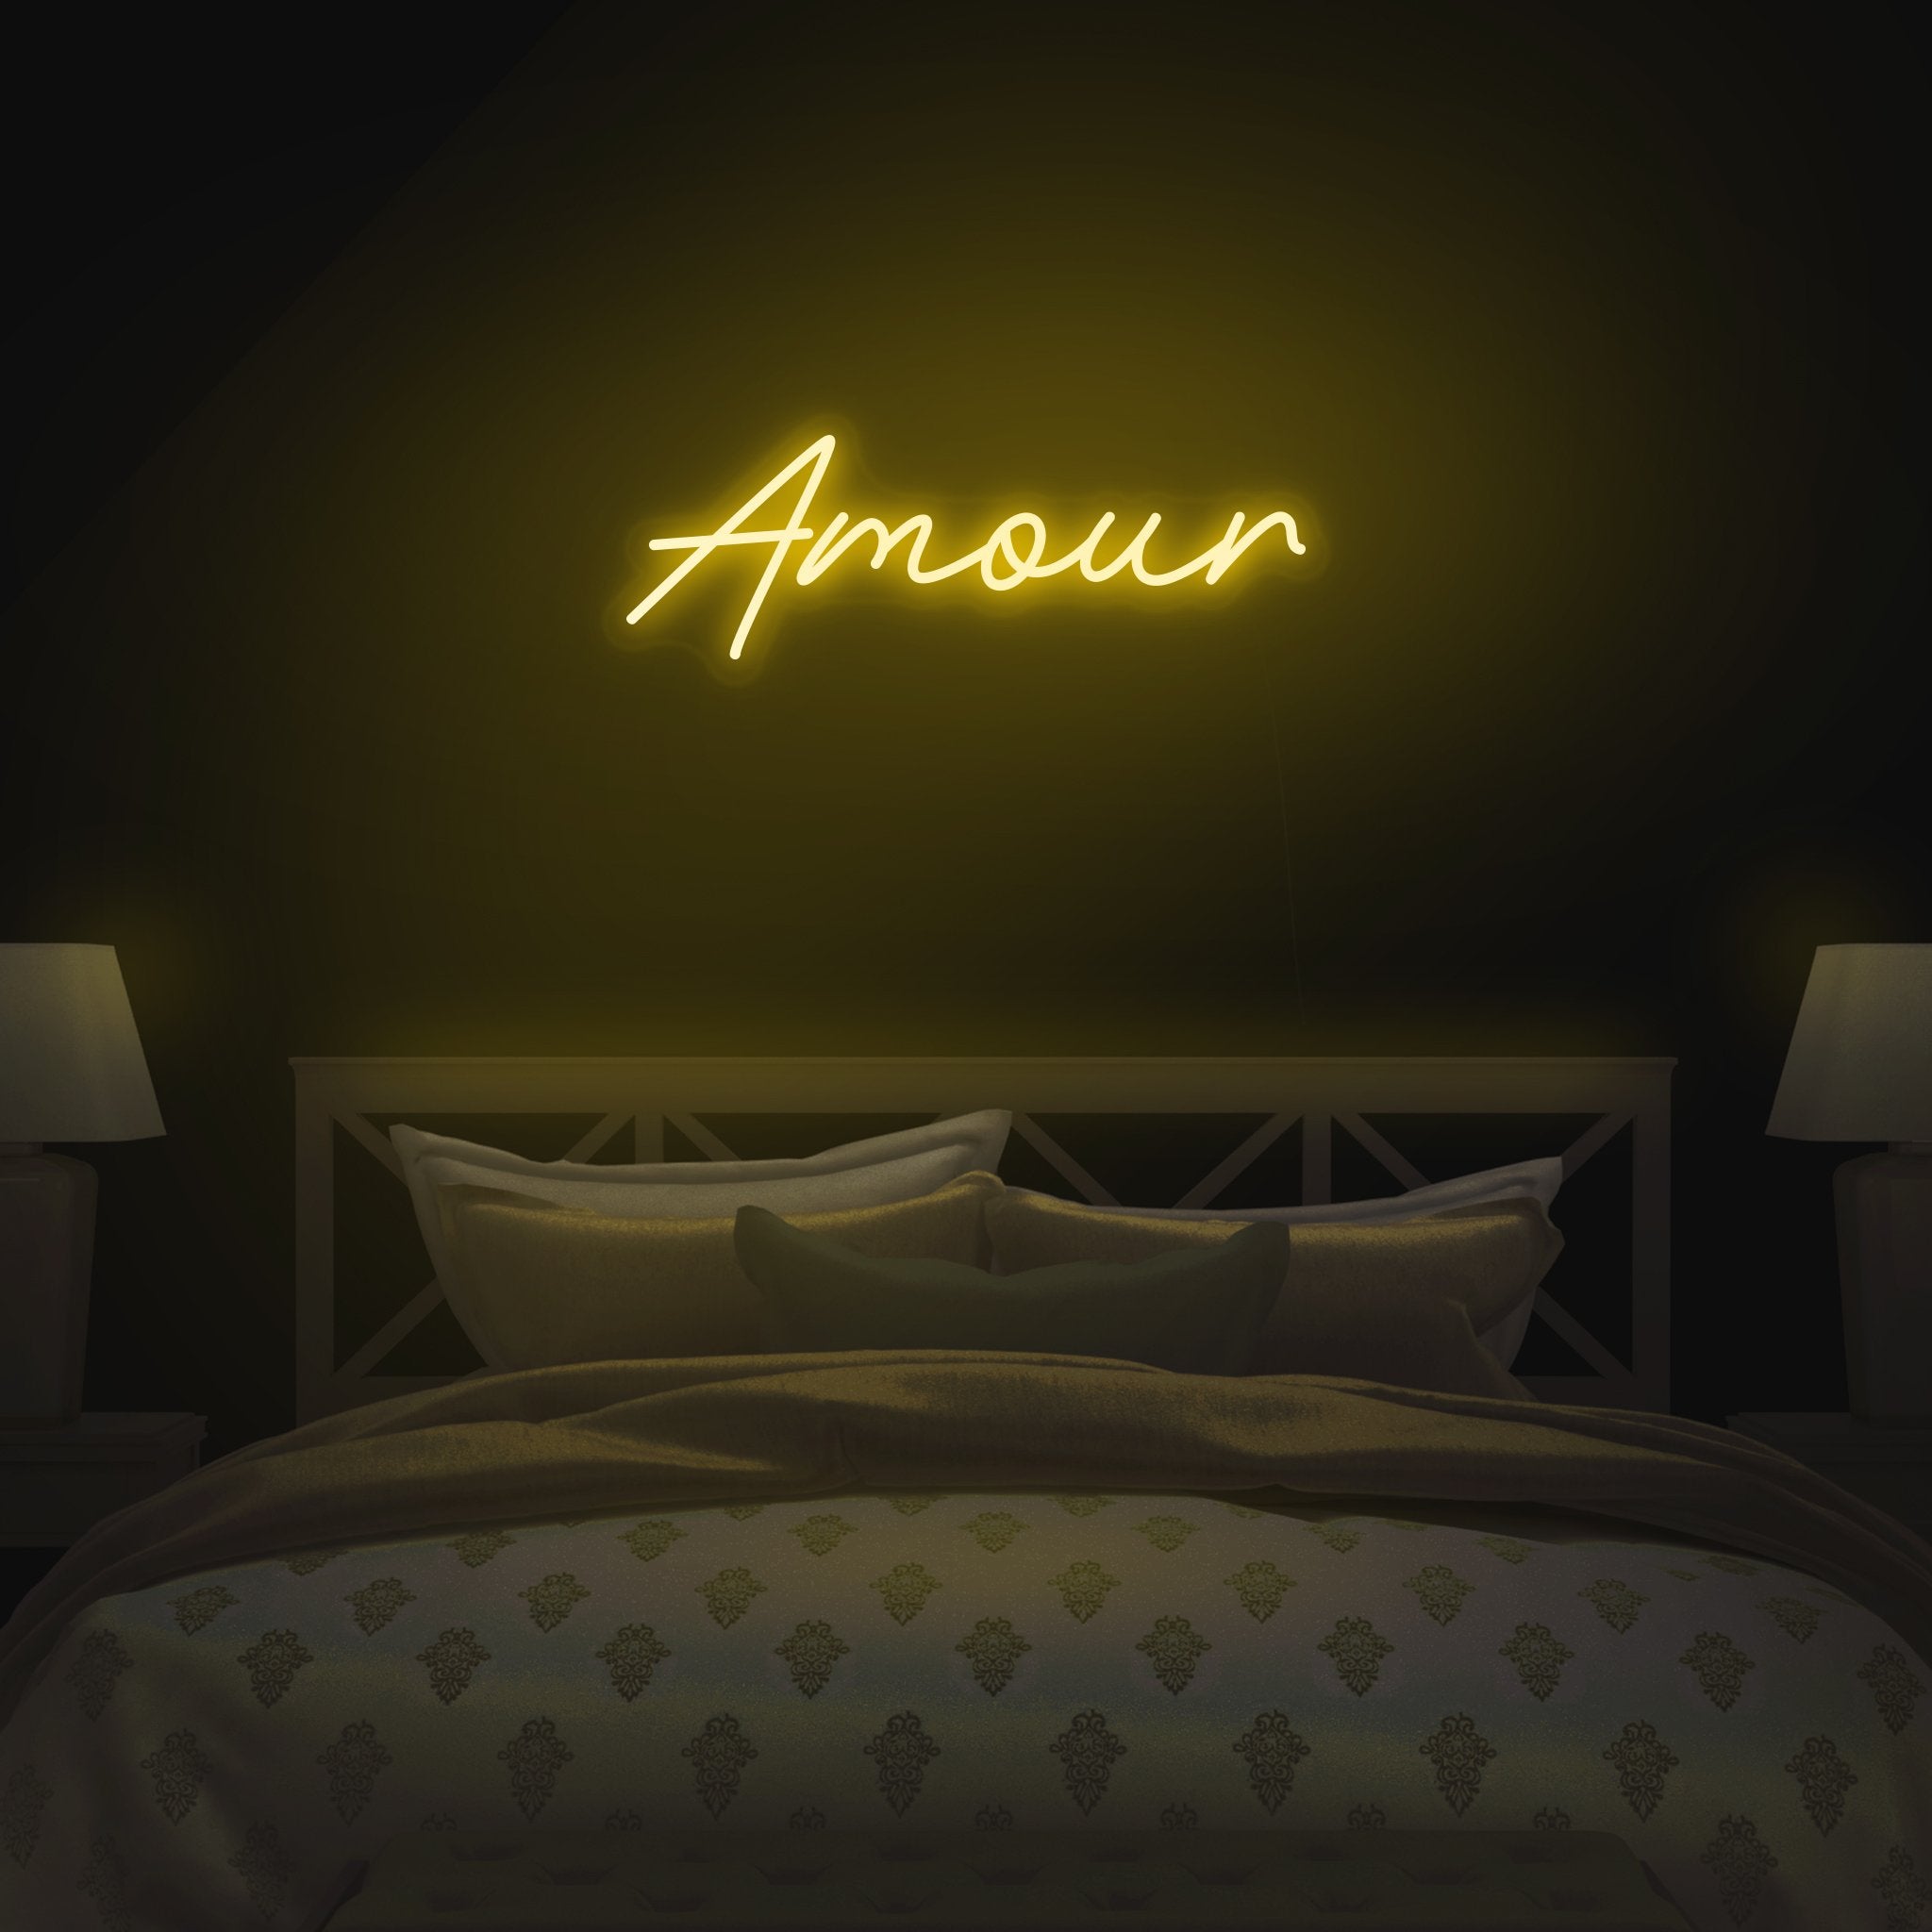 Amour - NeonFerry